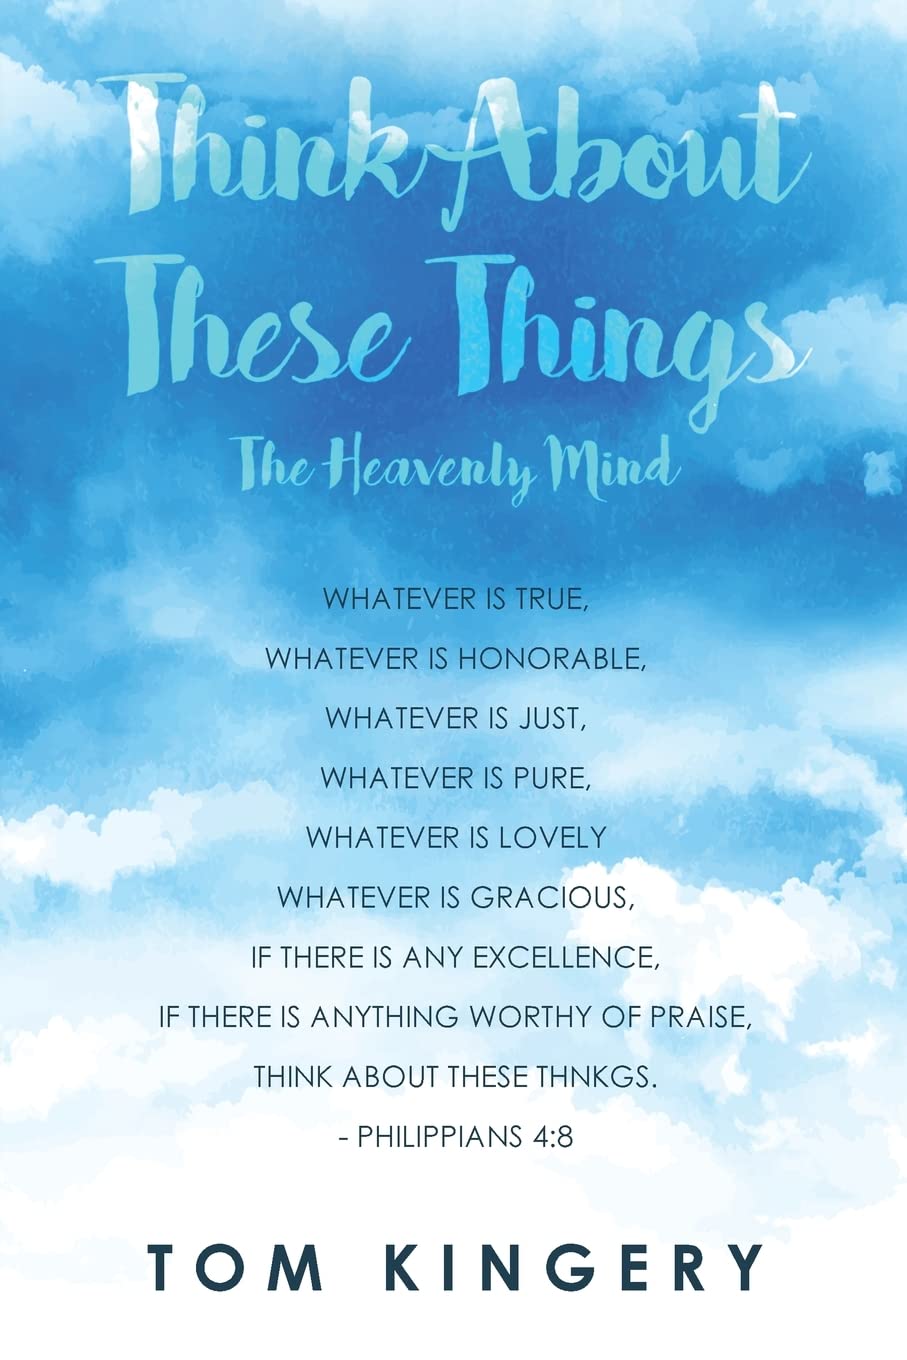 Tom Kingery launches new faith book titled: "Think about These Things: The Heavenly Mind" 